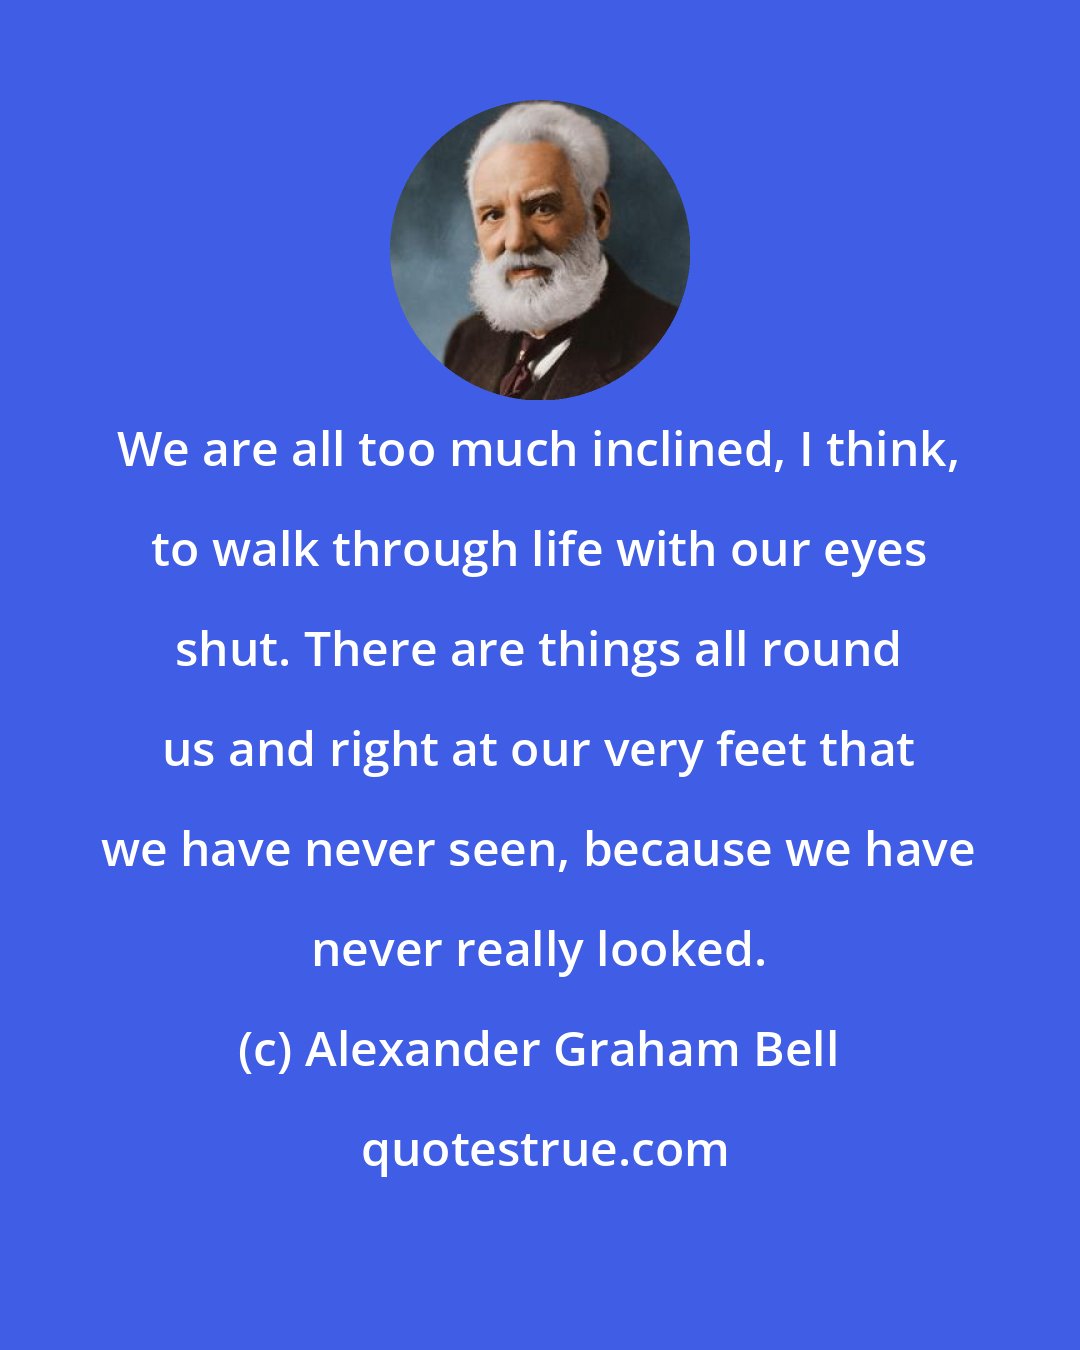 Alexander Graham Bell: We are all too much inclined, I think, to walk through life with our eyes shut. There are things all round us and right at our very feet that we have never seen, because we have never really looked.